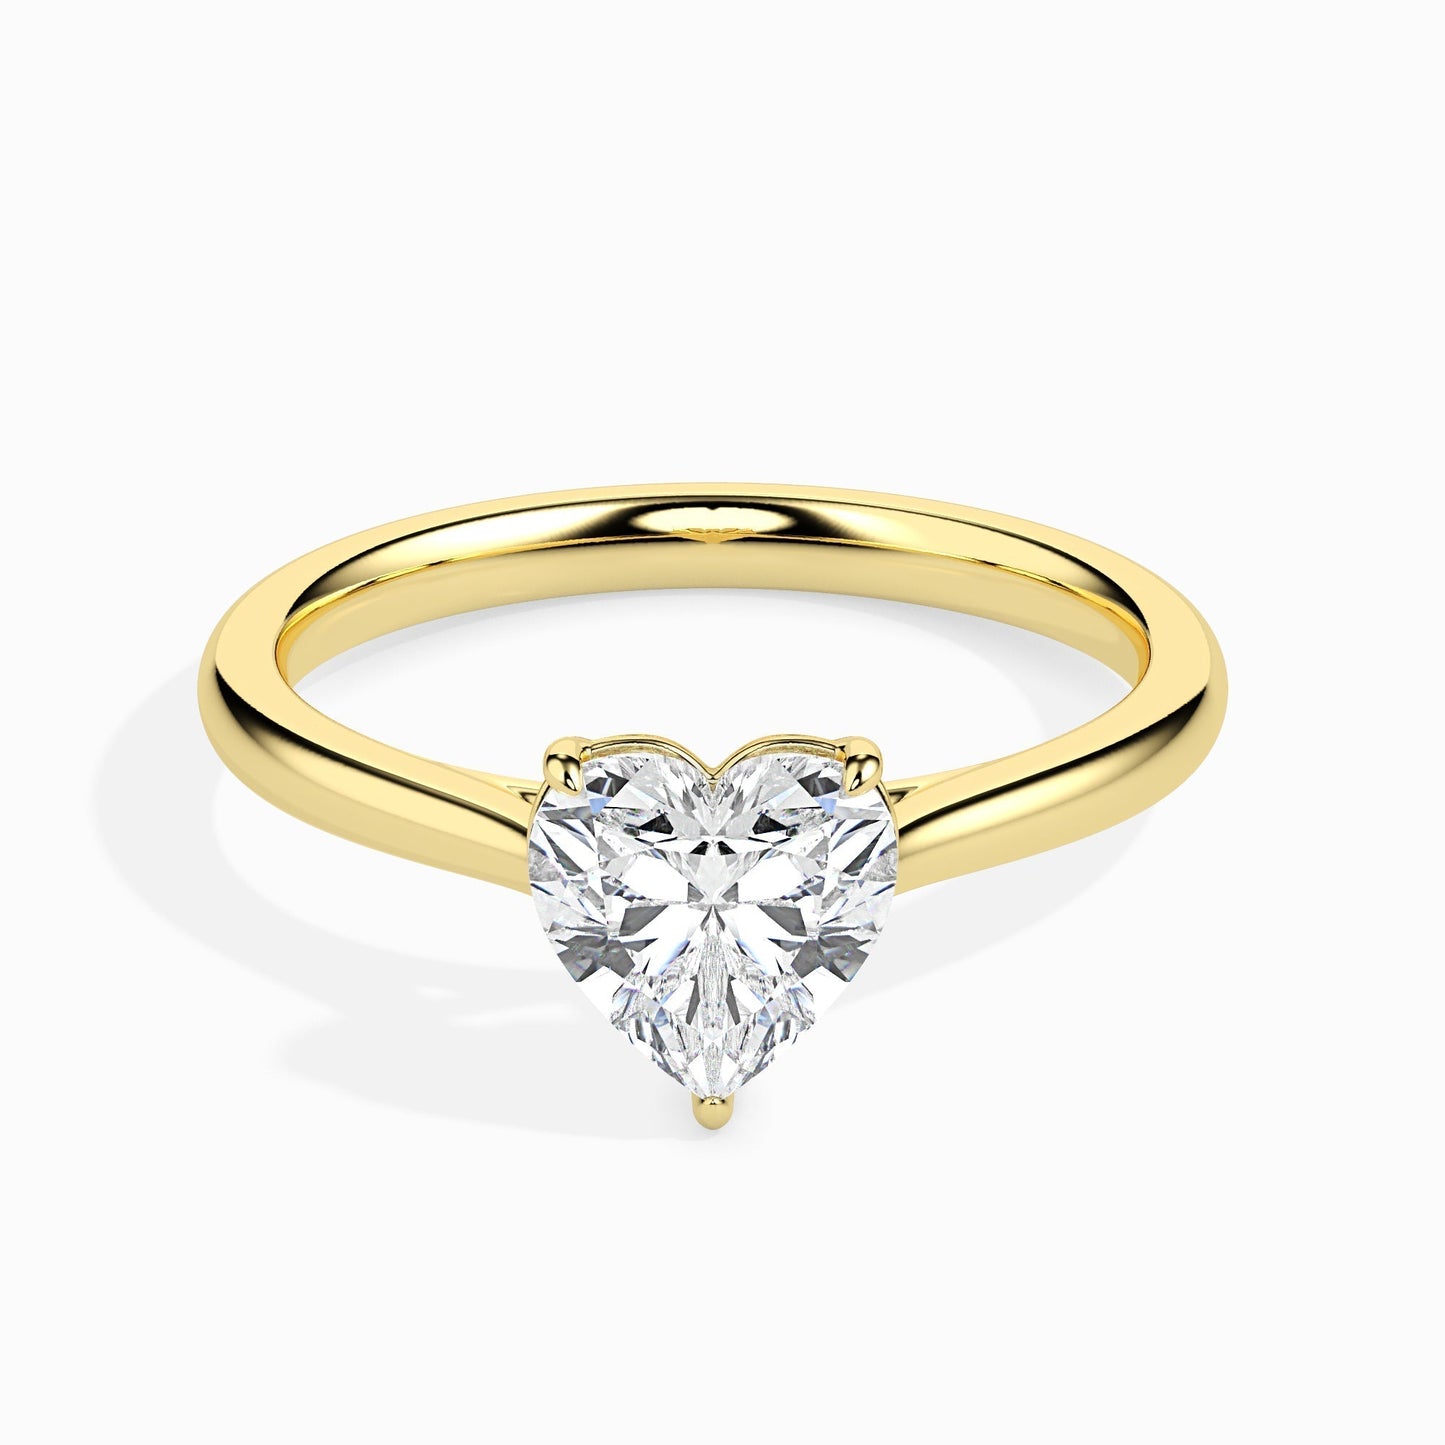 CaratsDirect2U | Heart Shaped Solitaire Engagement Rings